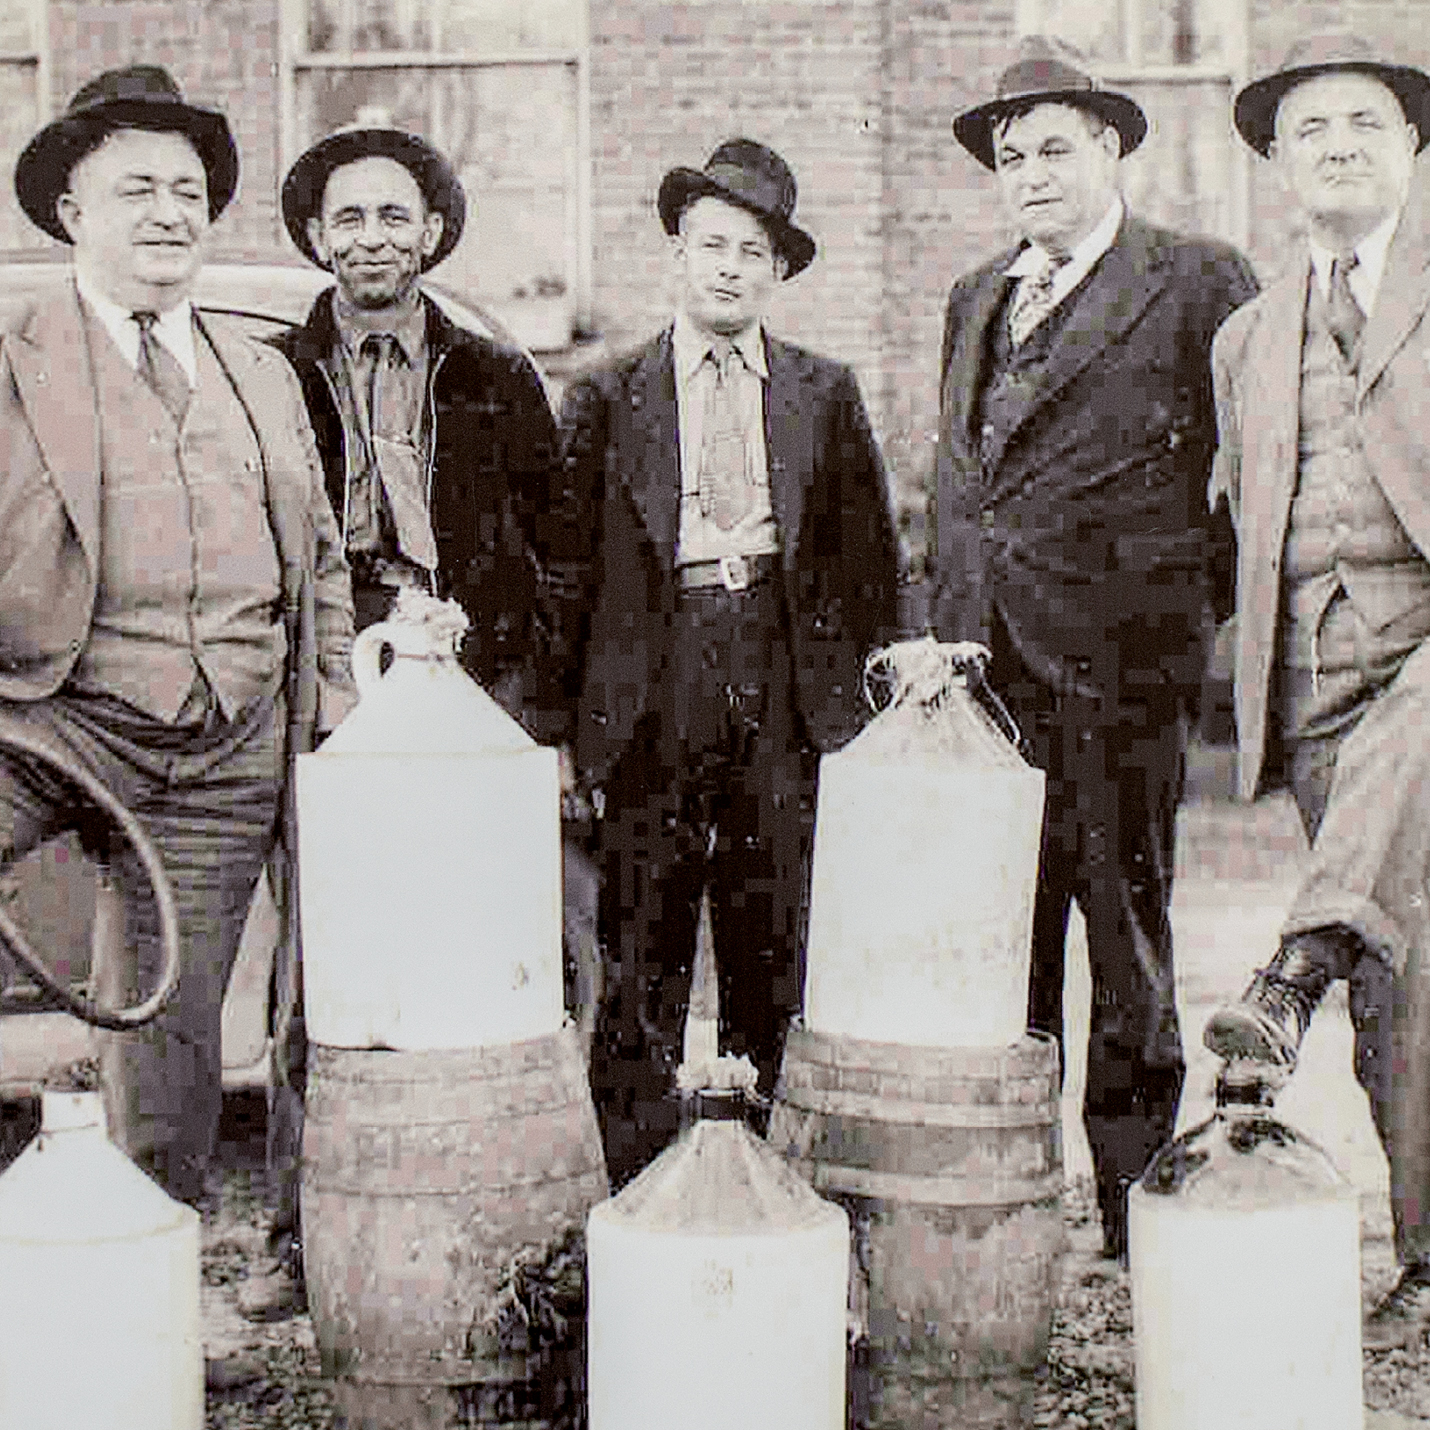 Raids of stills took place throughout the state, with authorities taking possession of the liquor, as shown in this circa-1930s photograph taken in Pickens County.